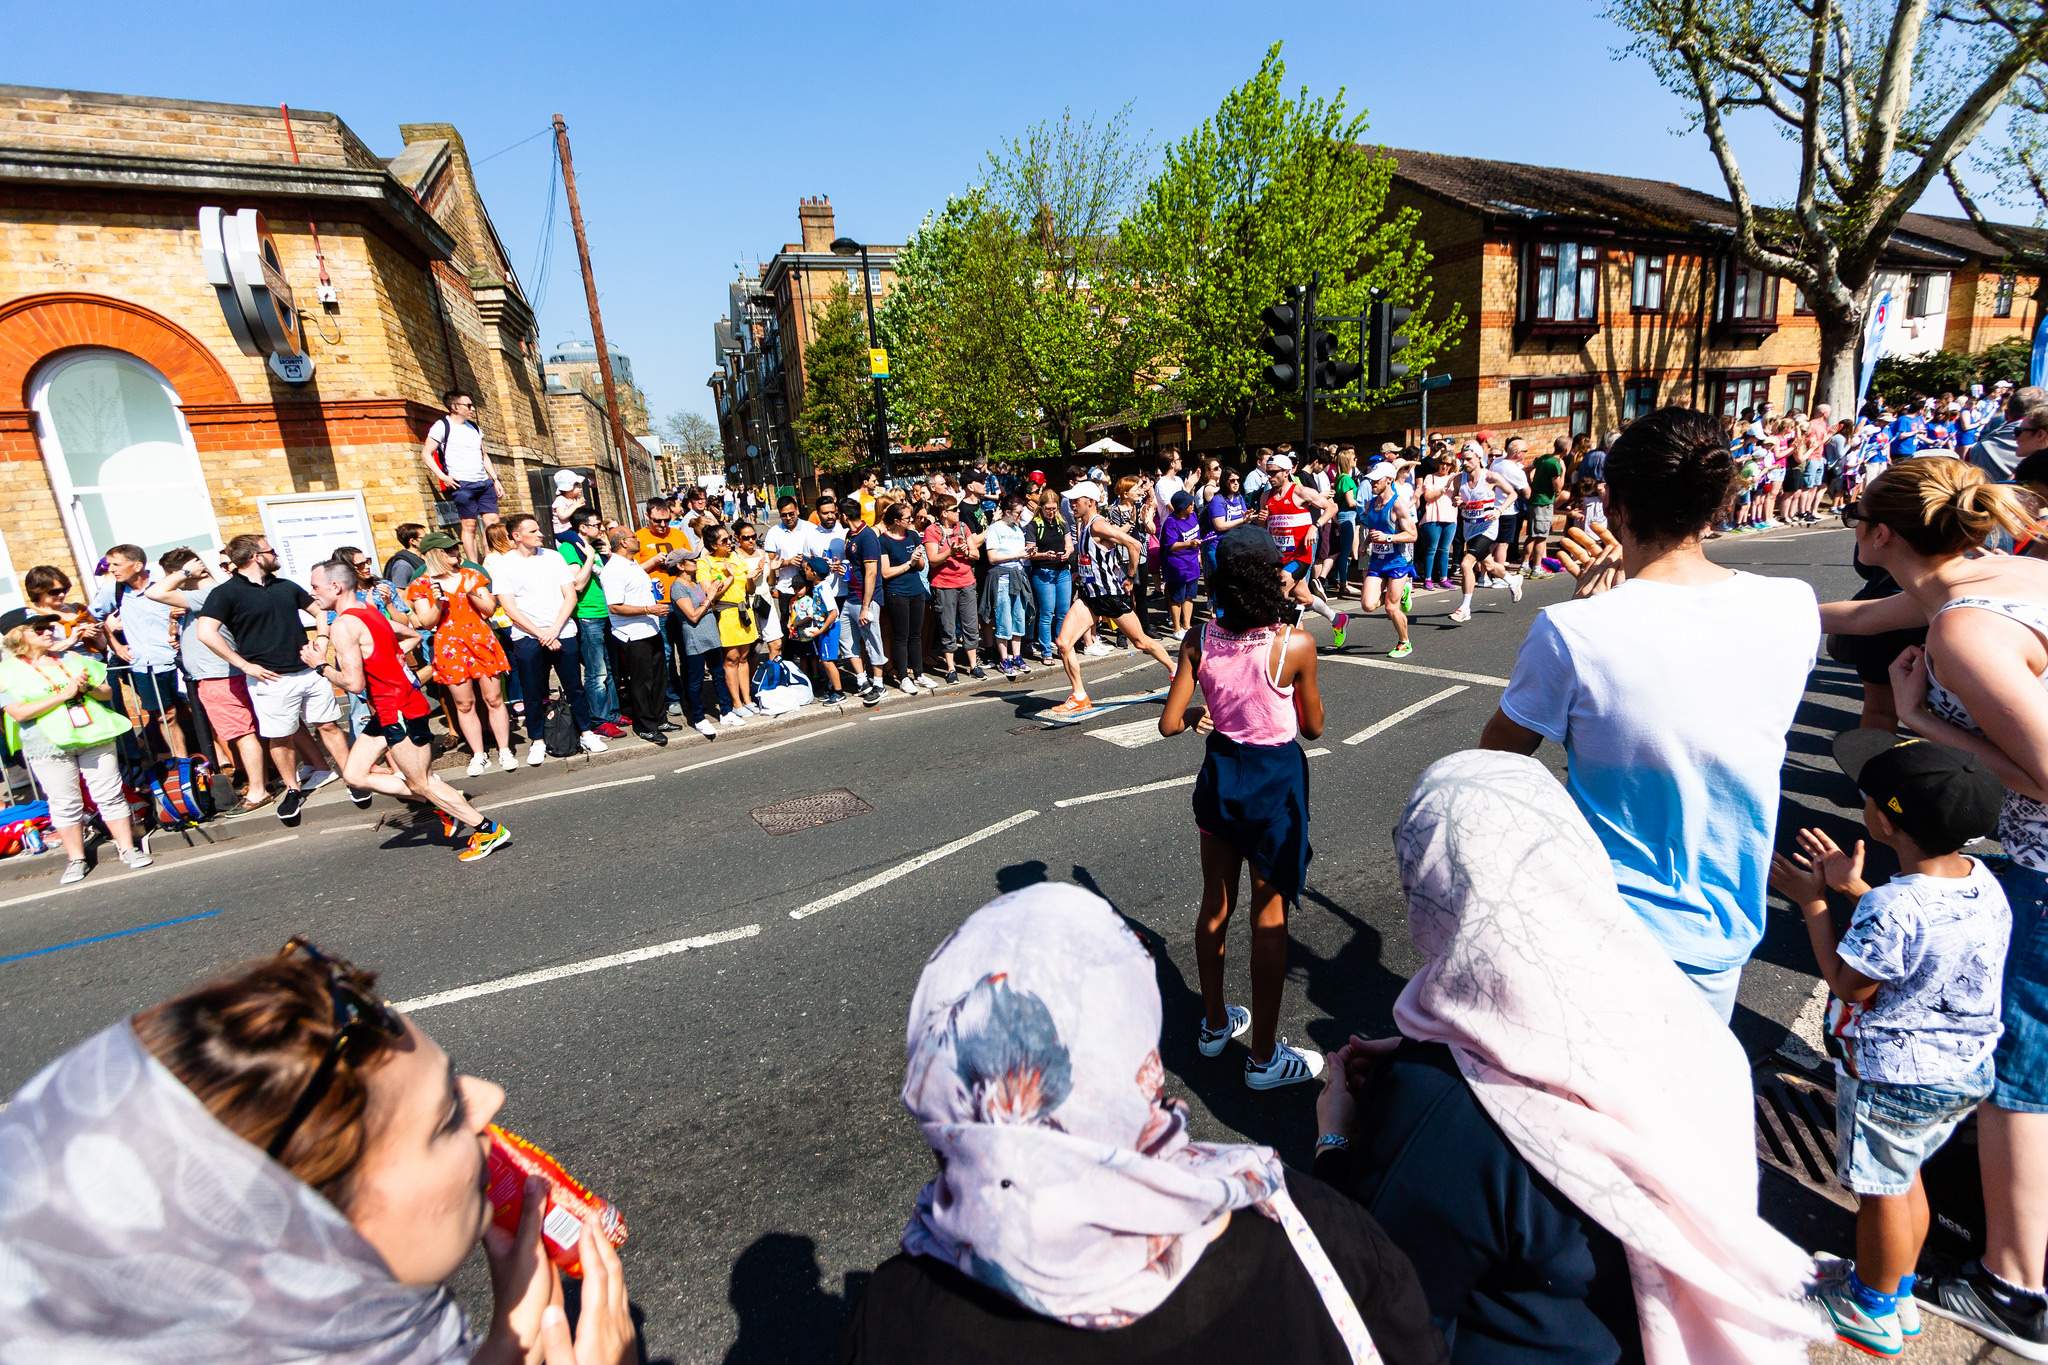 Rotherhithe area, literally packed with people on both sides, 2018 London Marathon